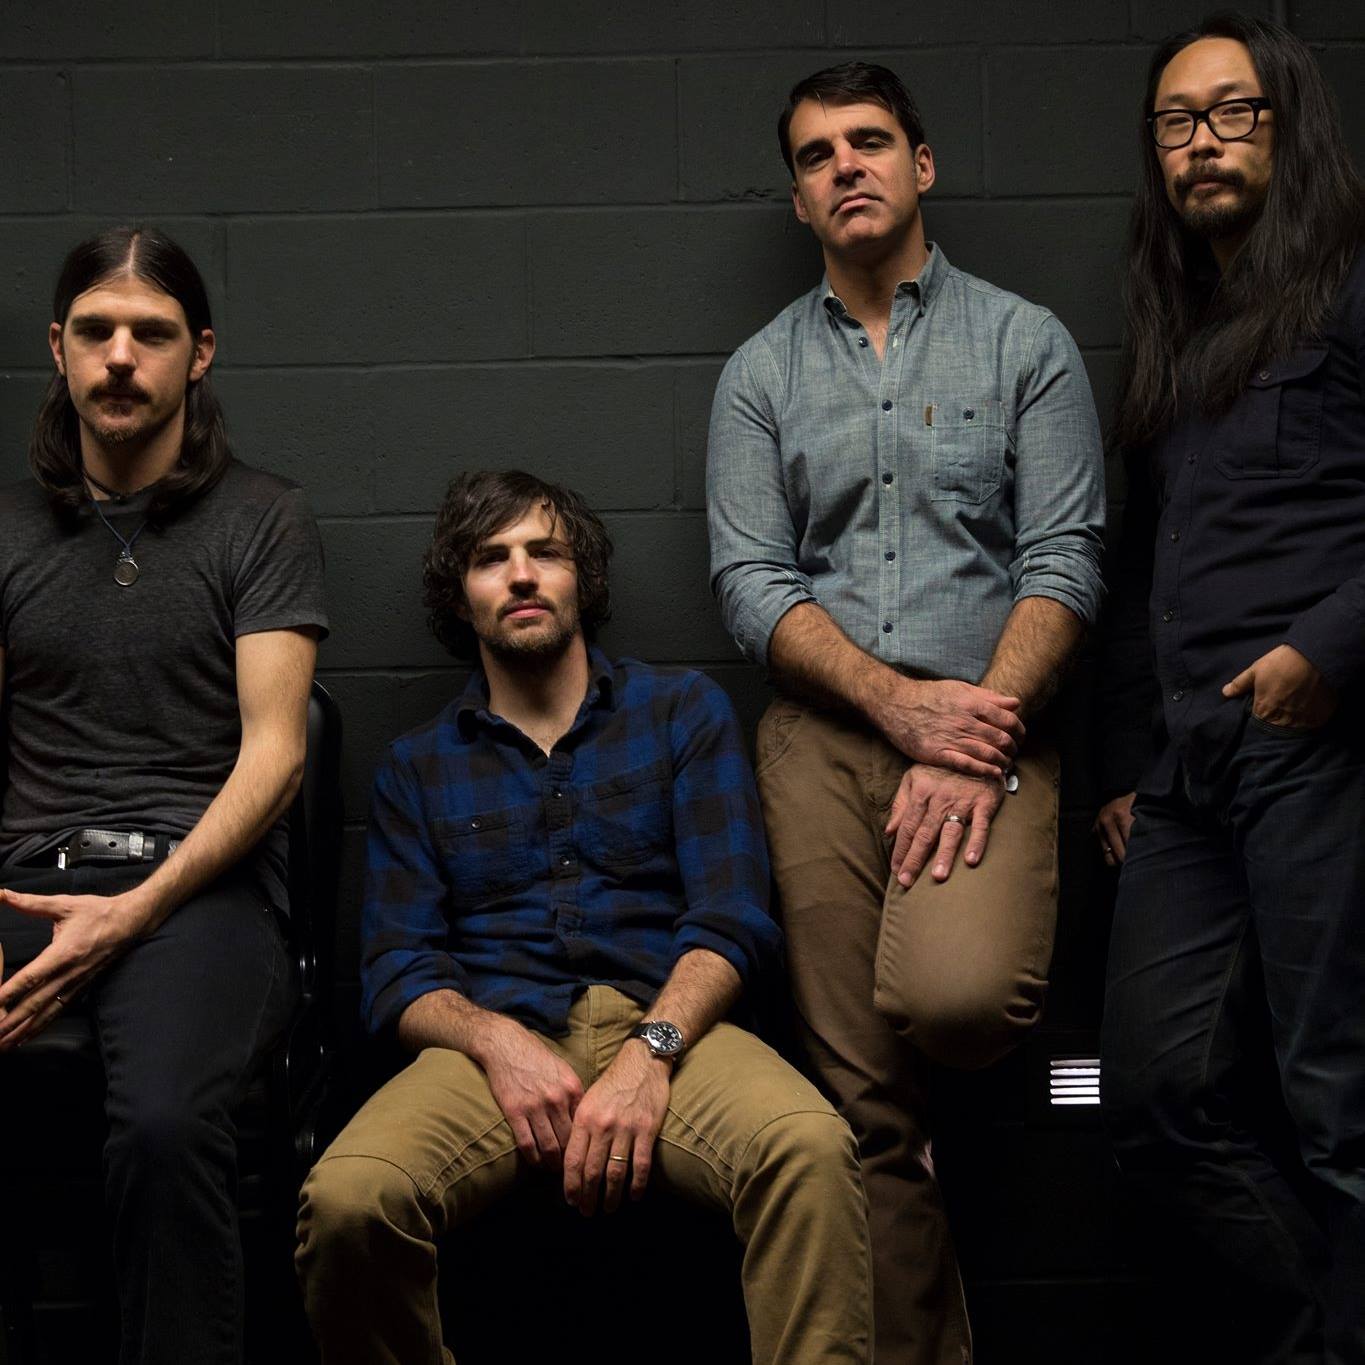 The Avett Brothers Announce 2019 Tour Dates (w/ Lake Street Dive